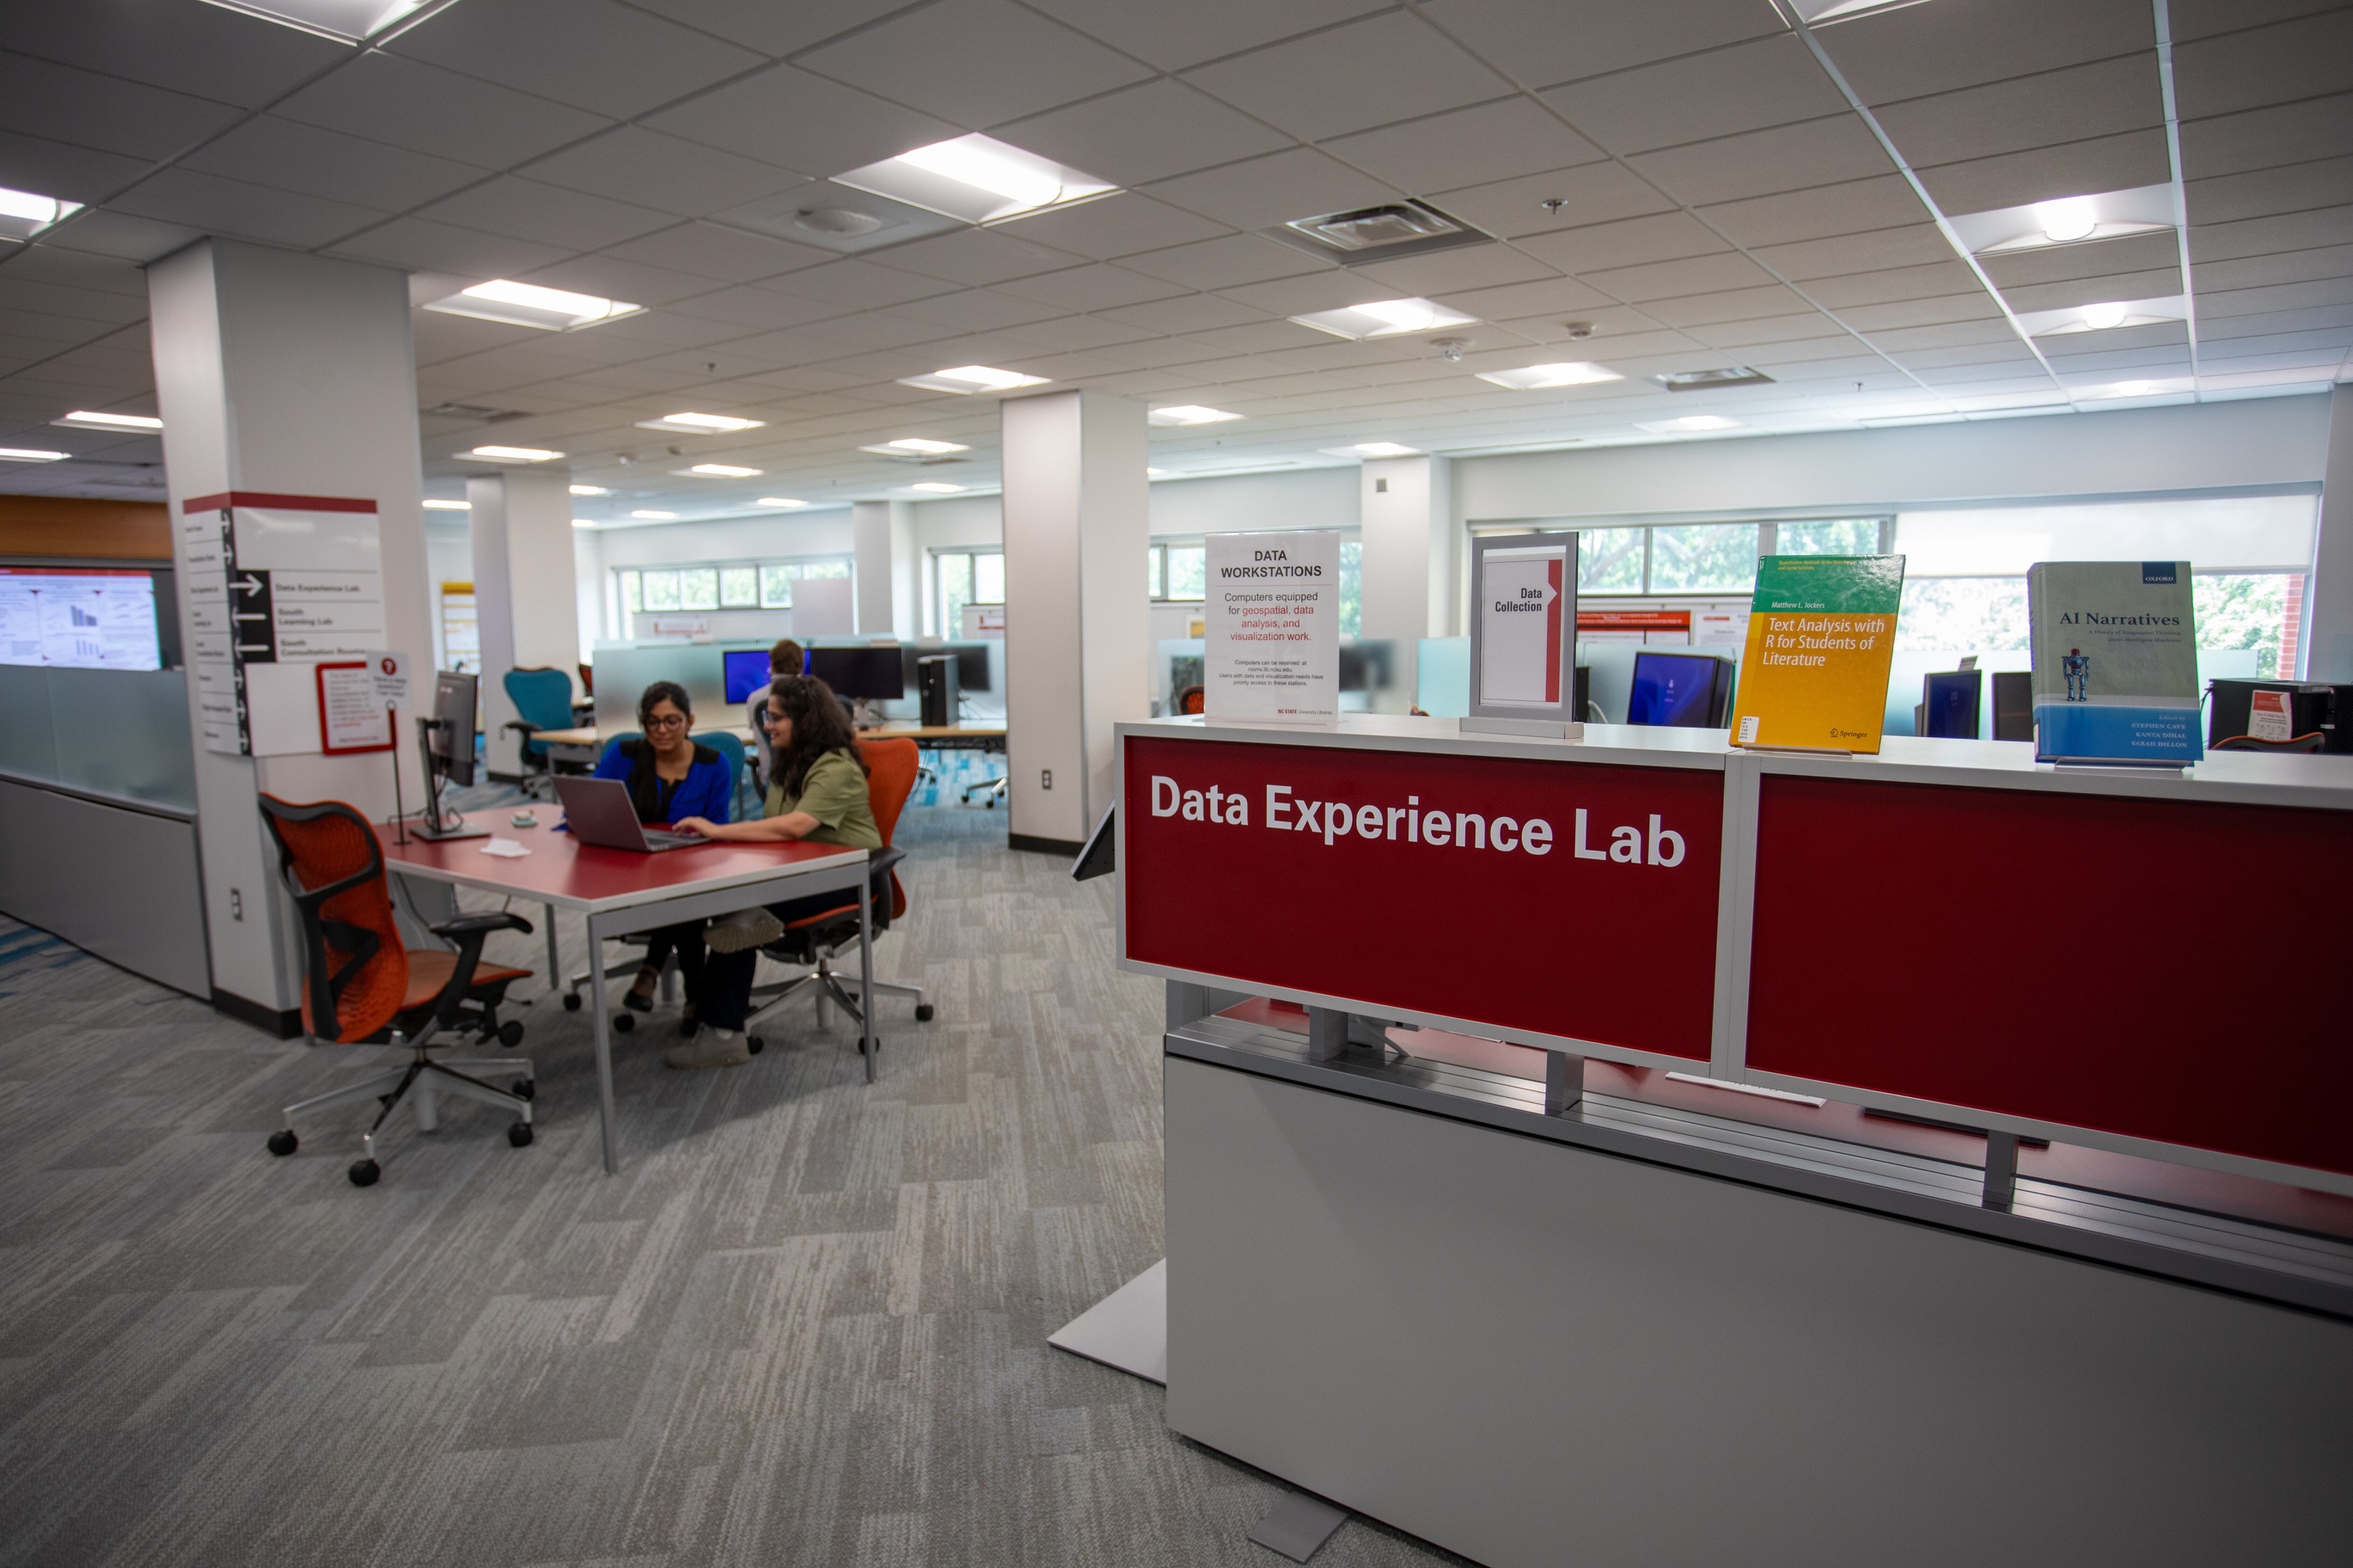 Photo shows a red sign with white lettering indicating the entrance to the "Data Experience Lab," a computing lab with an open and airy design. At the forefront of the image to the left of the sign is a table at which a data science consultant sits with a computer.  She is providing assistance to another student. Behind them, a large wall of windows lights the features of the space. Around the room are computer workstations, a seating area with whiteboard tables, and various data visualizations.